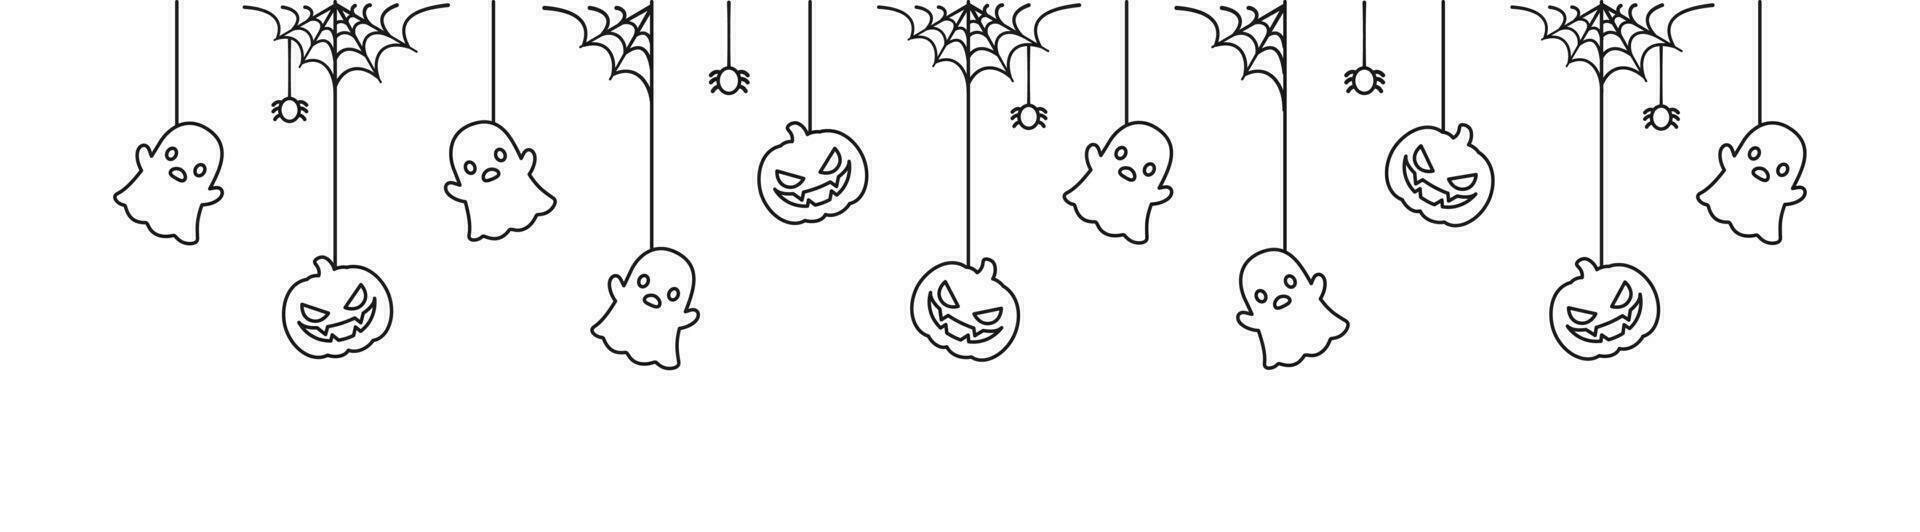 Happy Halloween banner or border with ghost and jack o lantern pumpkins outline doodle. Hanging Spooky Ornaments Decoration Vector illustration, trick or treat party invitation